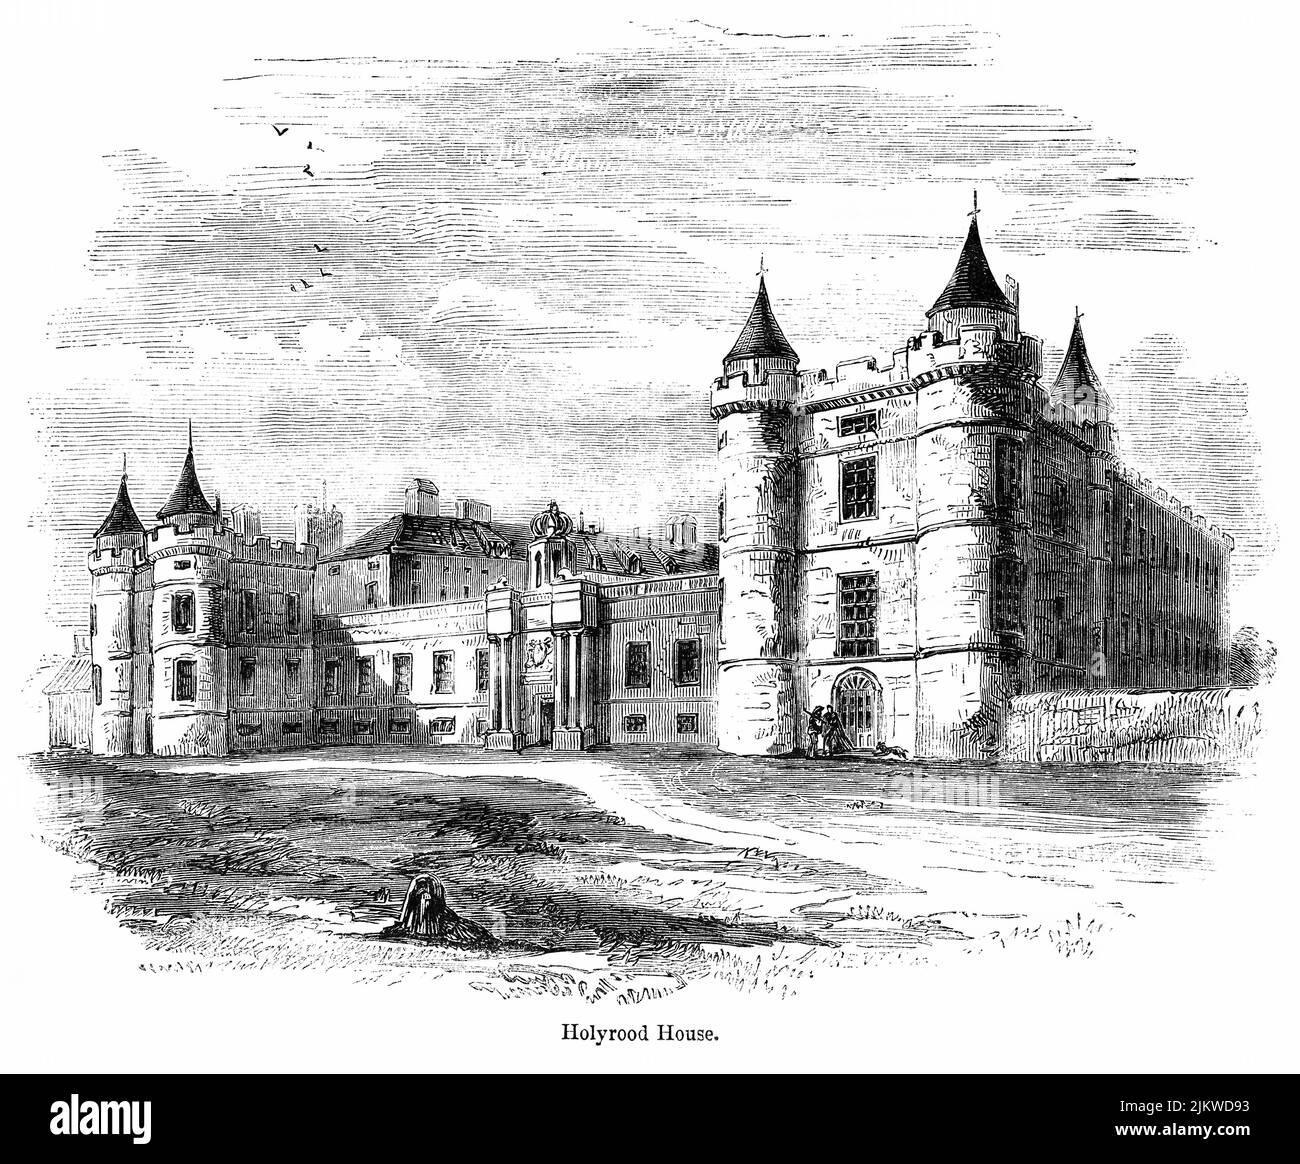 Holyrood House, Illustration from the Book, 'John Cassel’s Illustrated History of England, Volume II', text by William Howitt, Cassell, Petter, and Galpin, London, 1858 Stock Photo